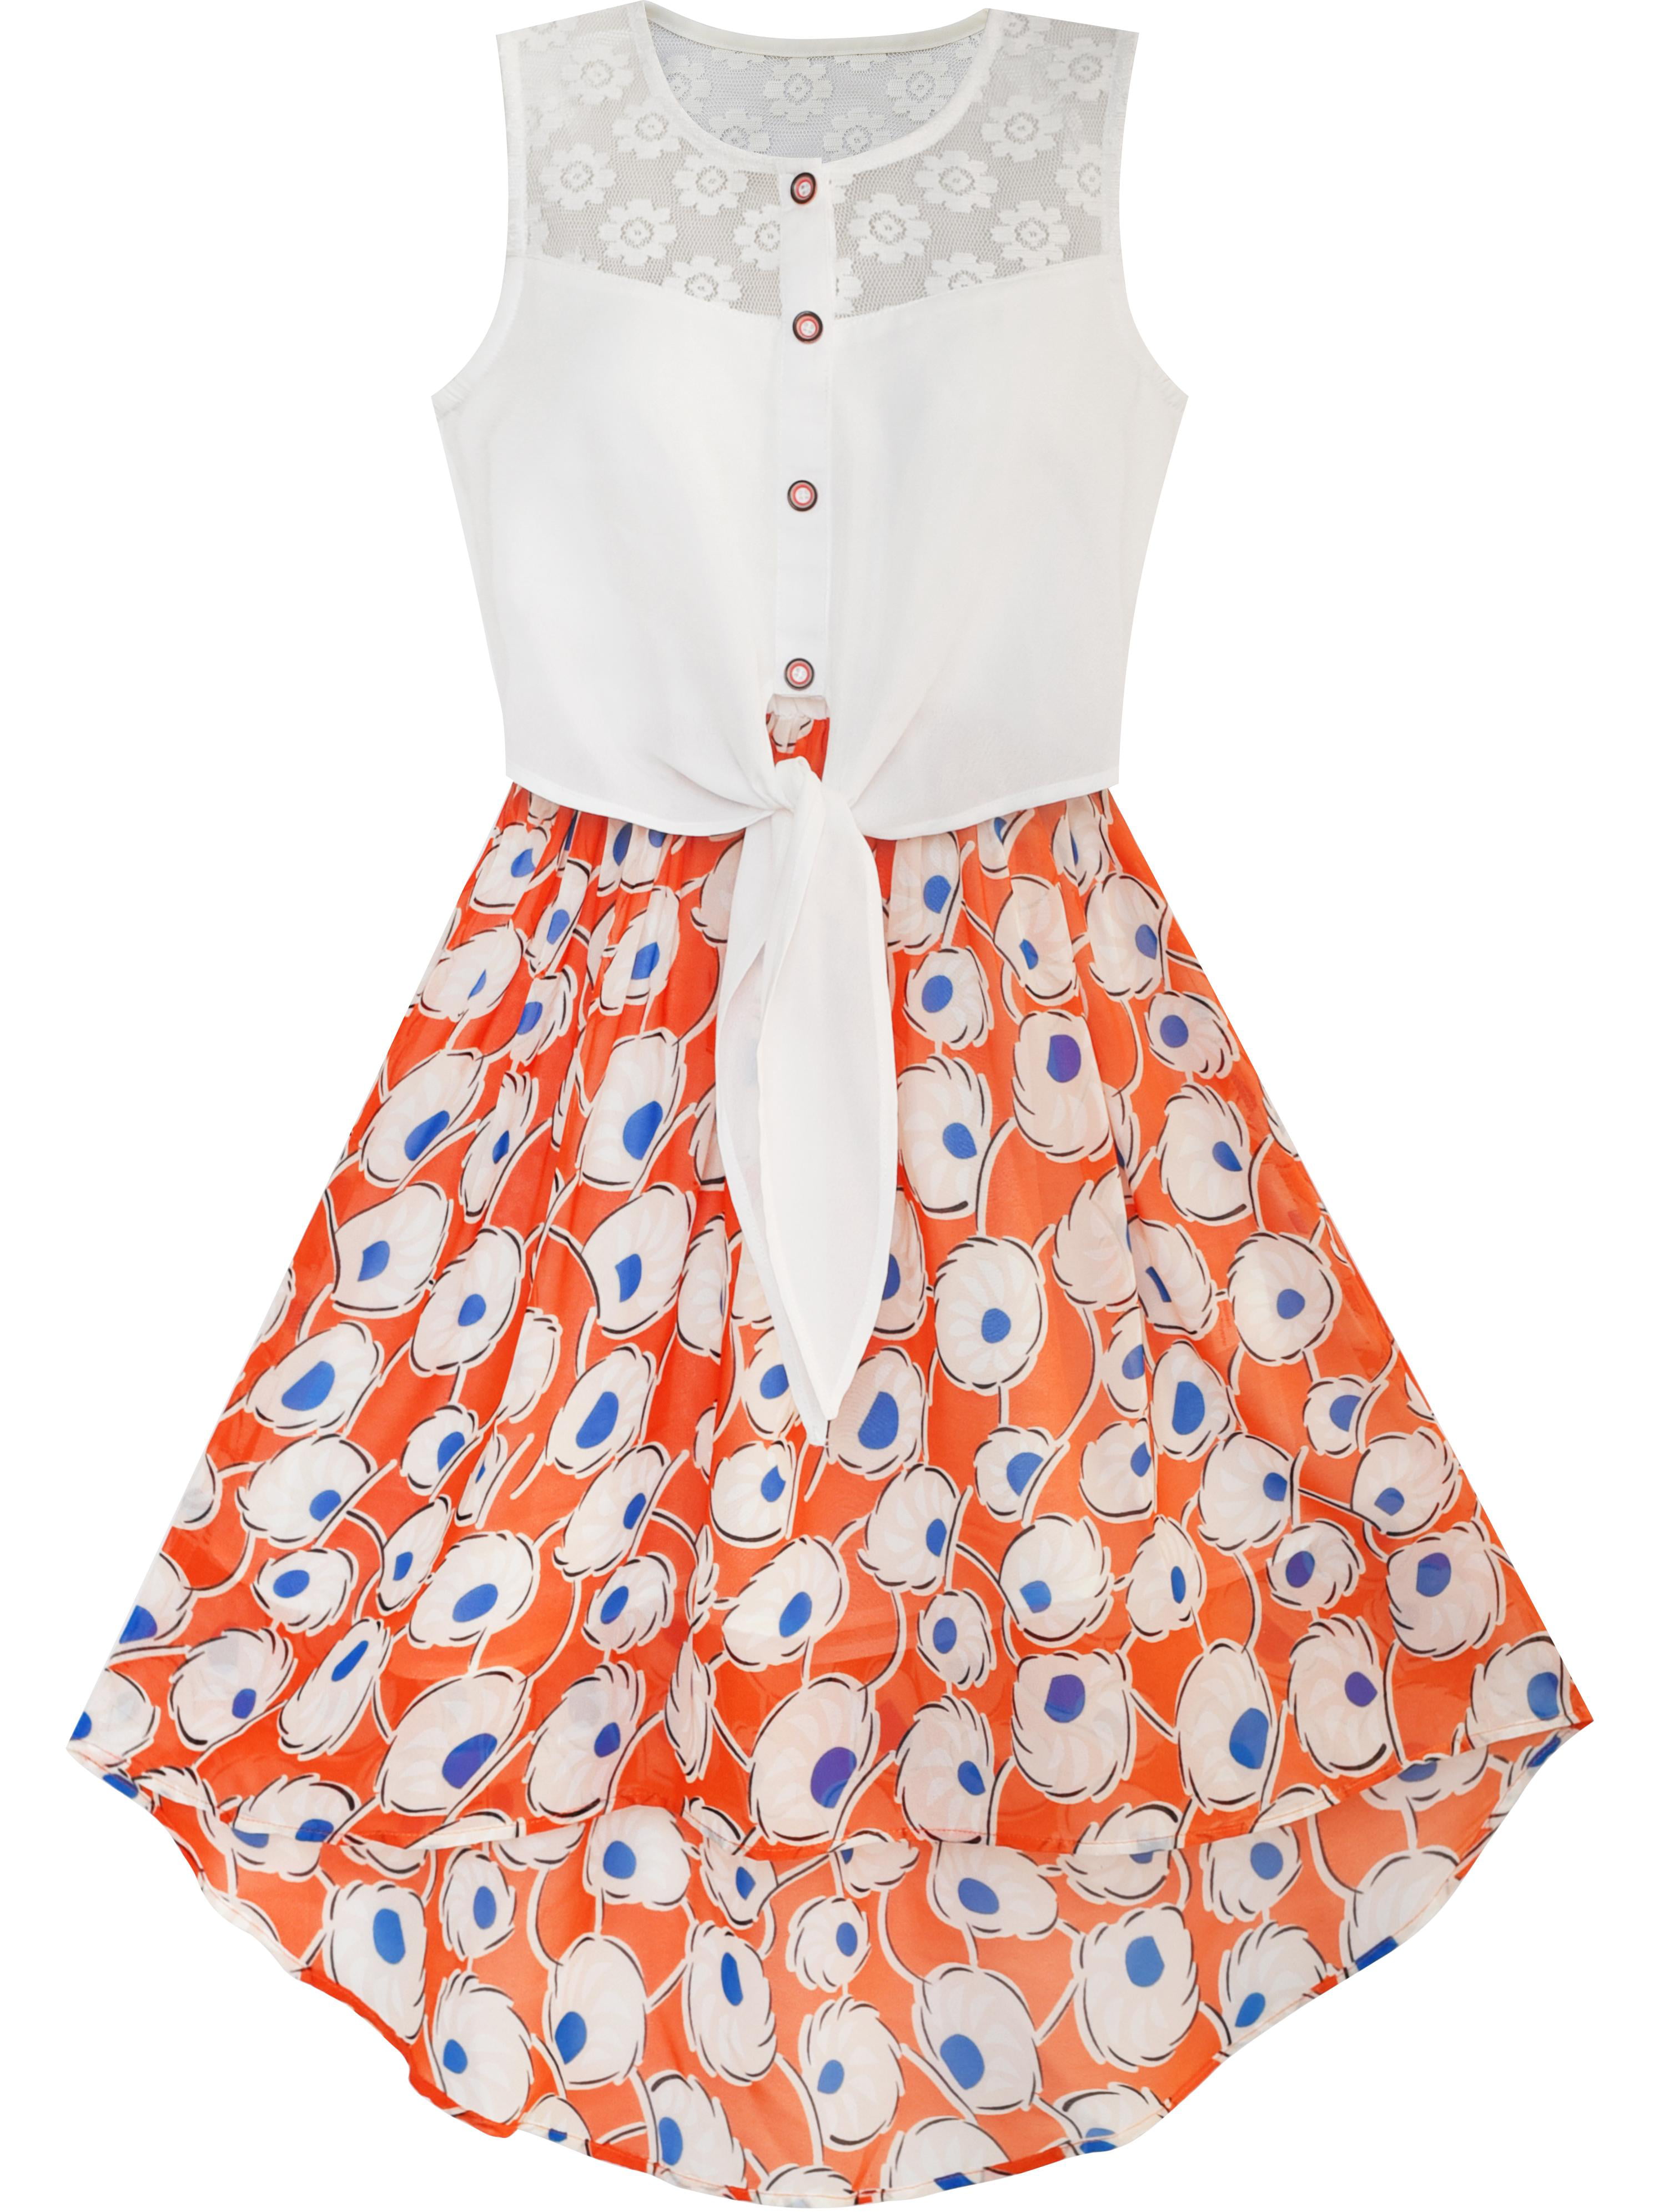 Details about   Summer Toddler Baby Flower Girl Orange Lace Dress with Colorful Polka Dots 